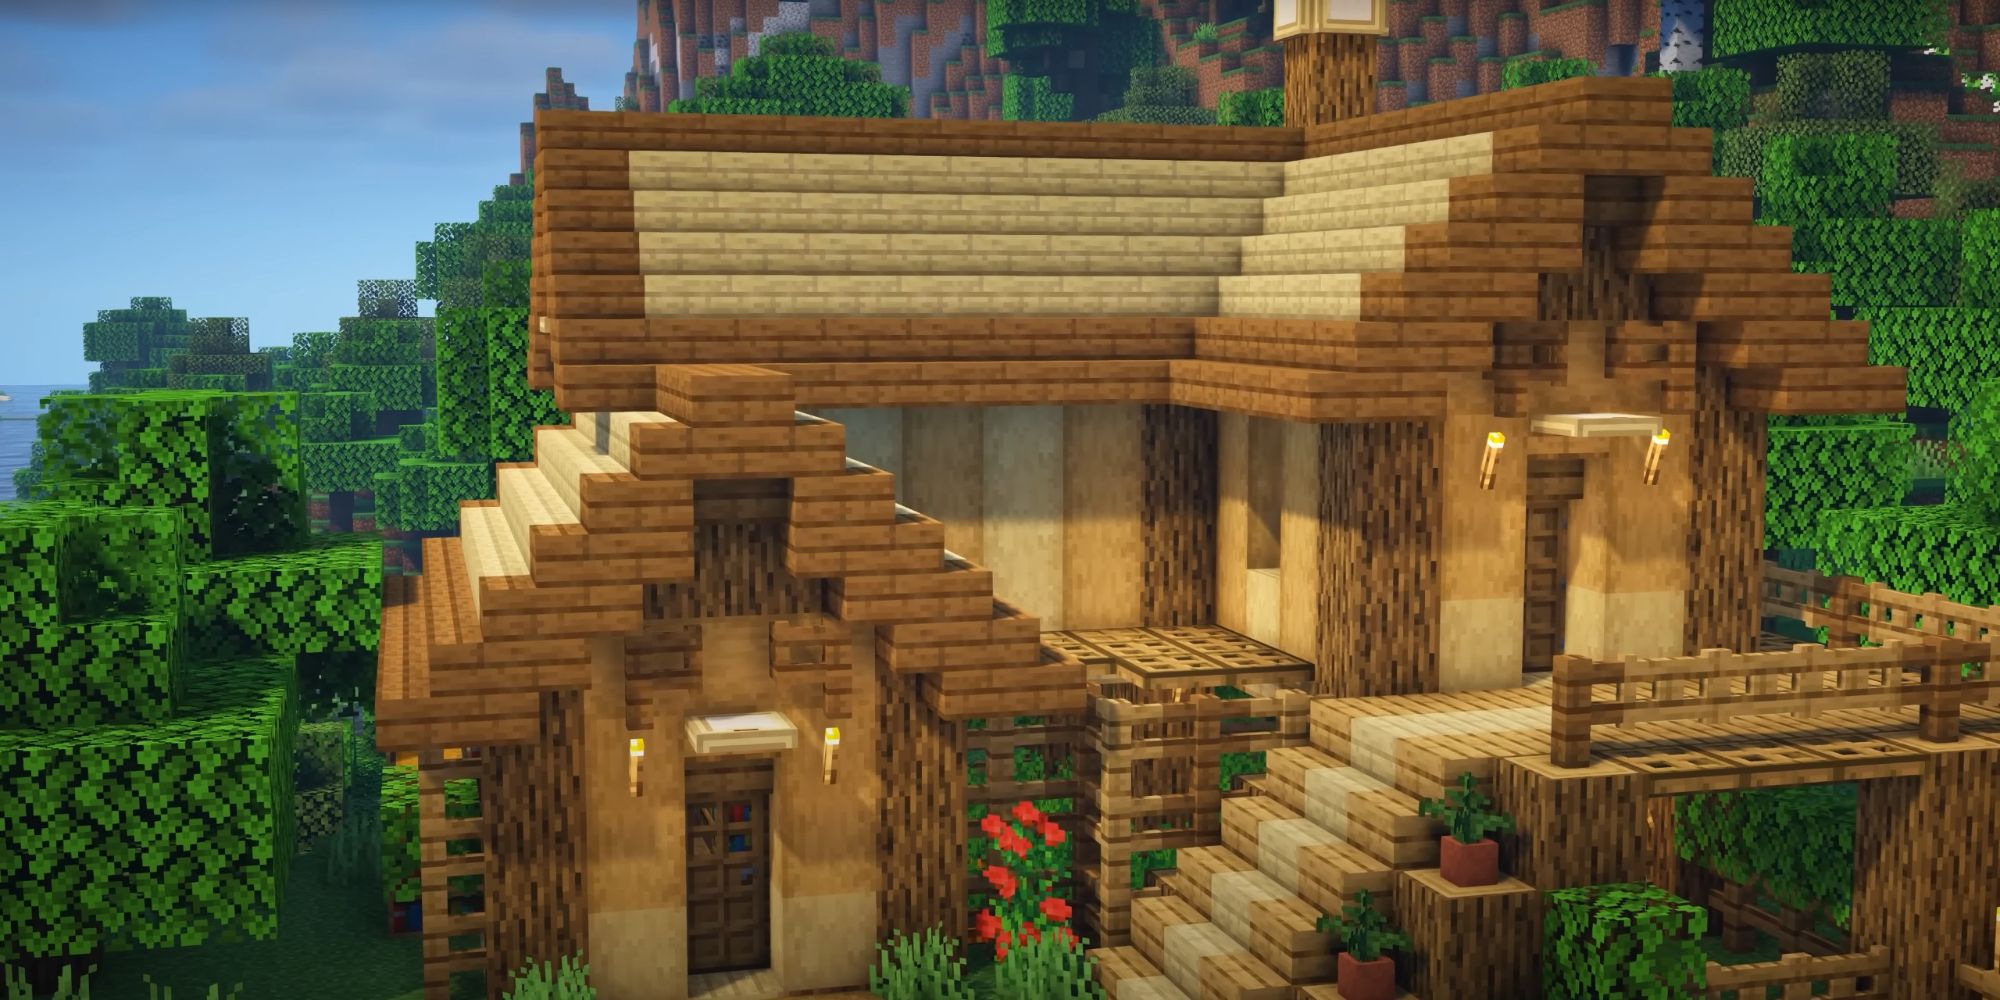 An image from Minecraft of Starter Oak House. This house is modeled after a villager house, and is made up of oak and birch wood, with a lower level for farming and enchanting.